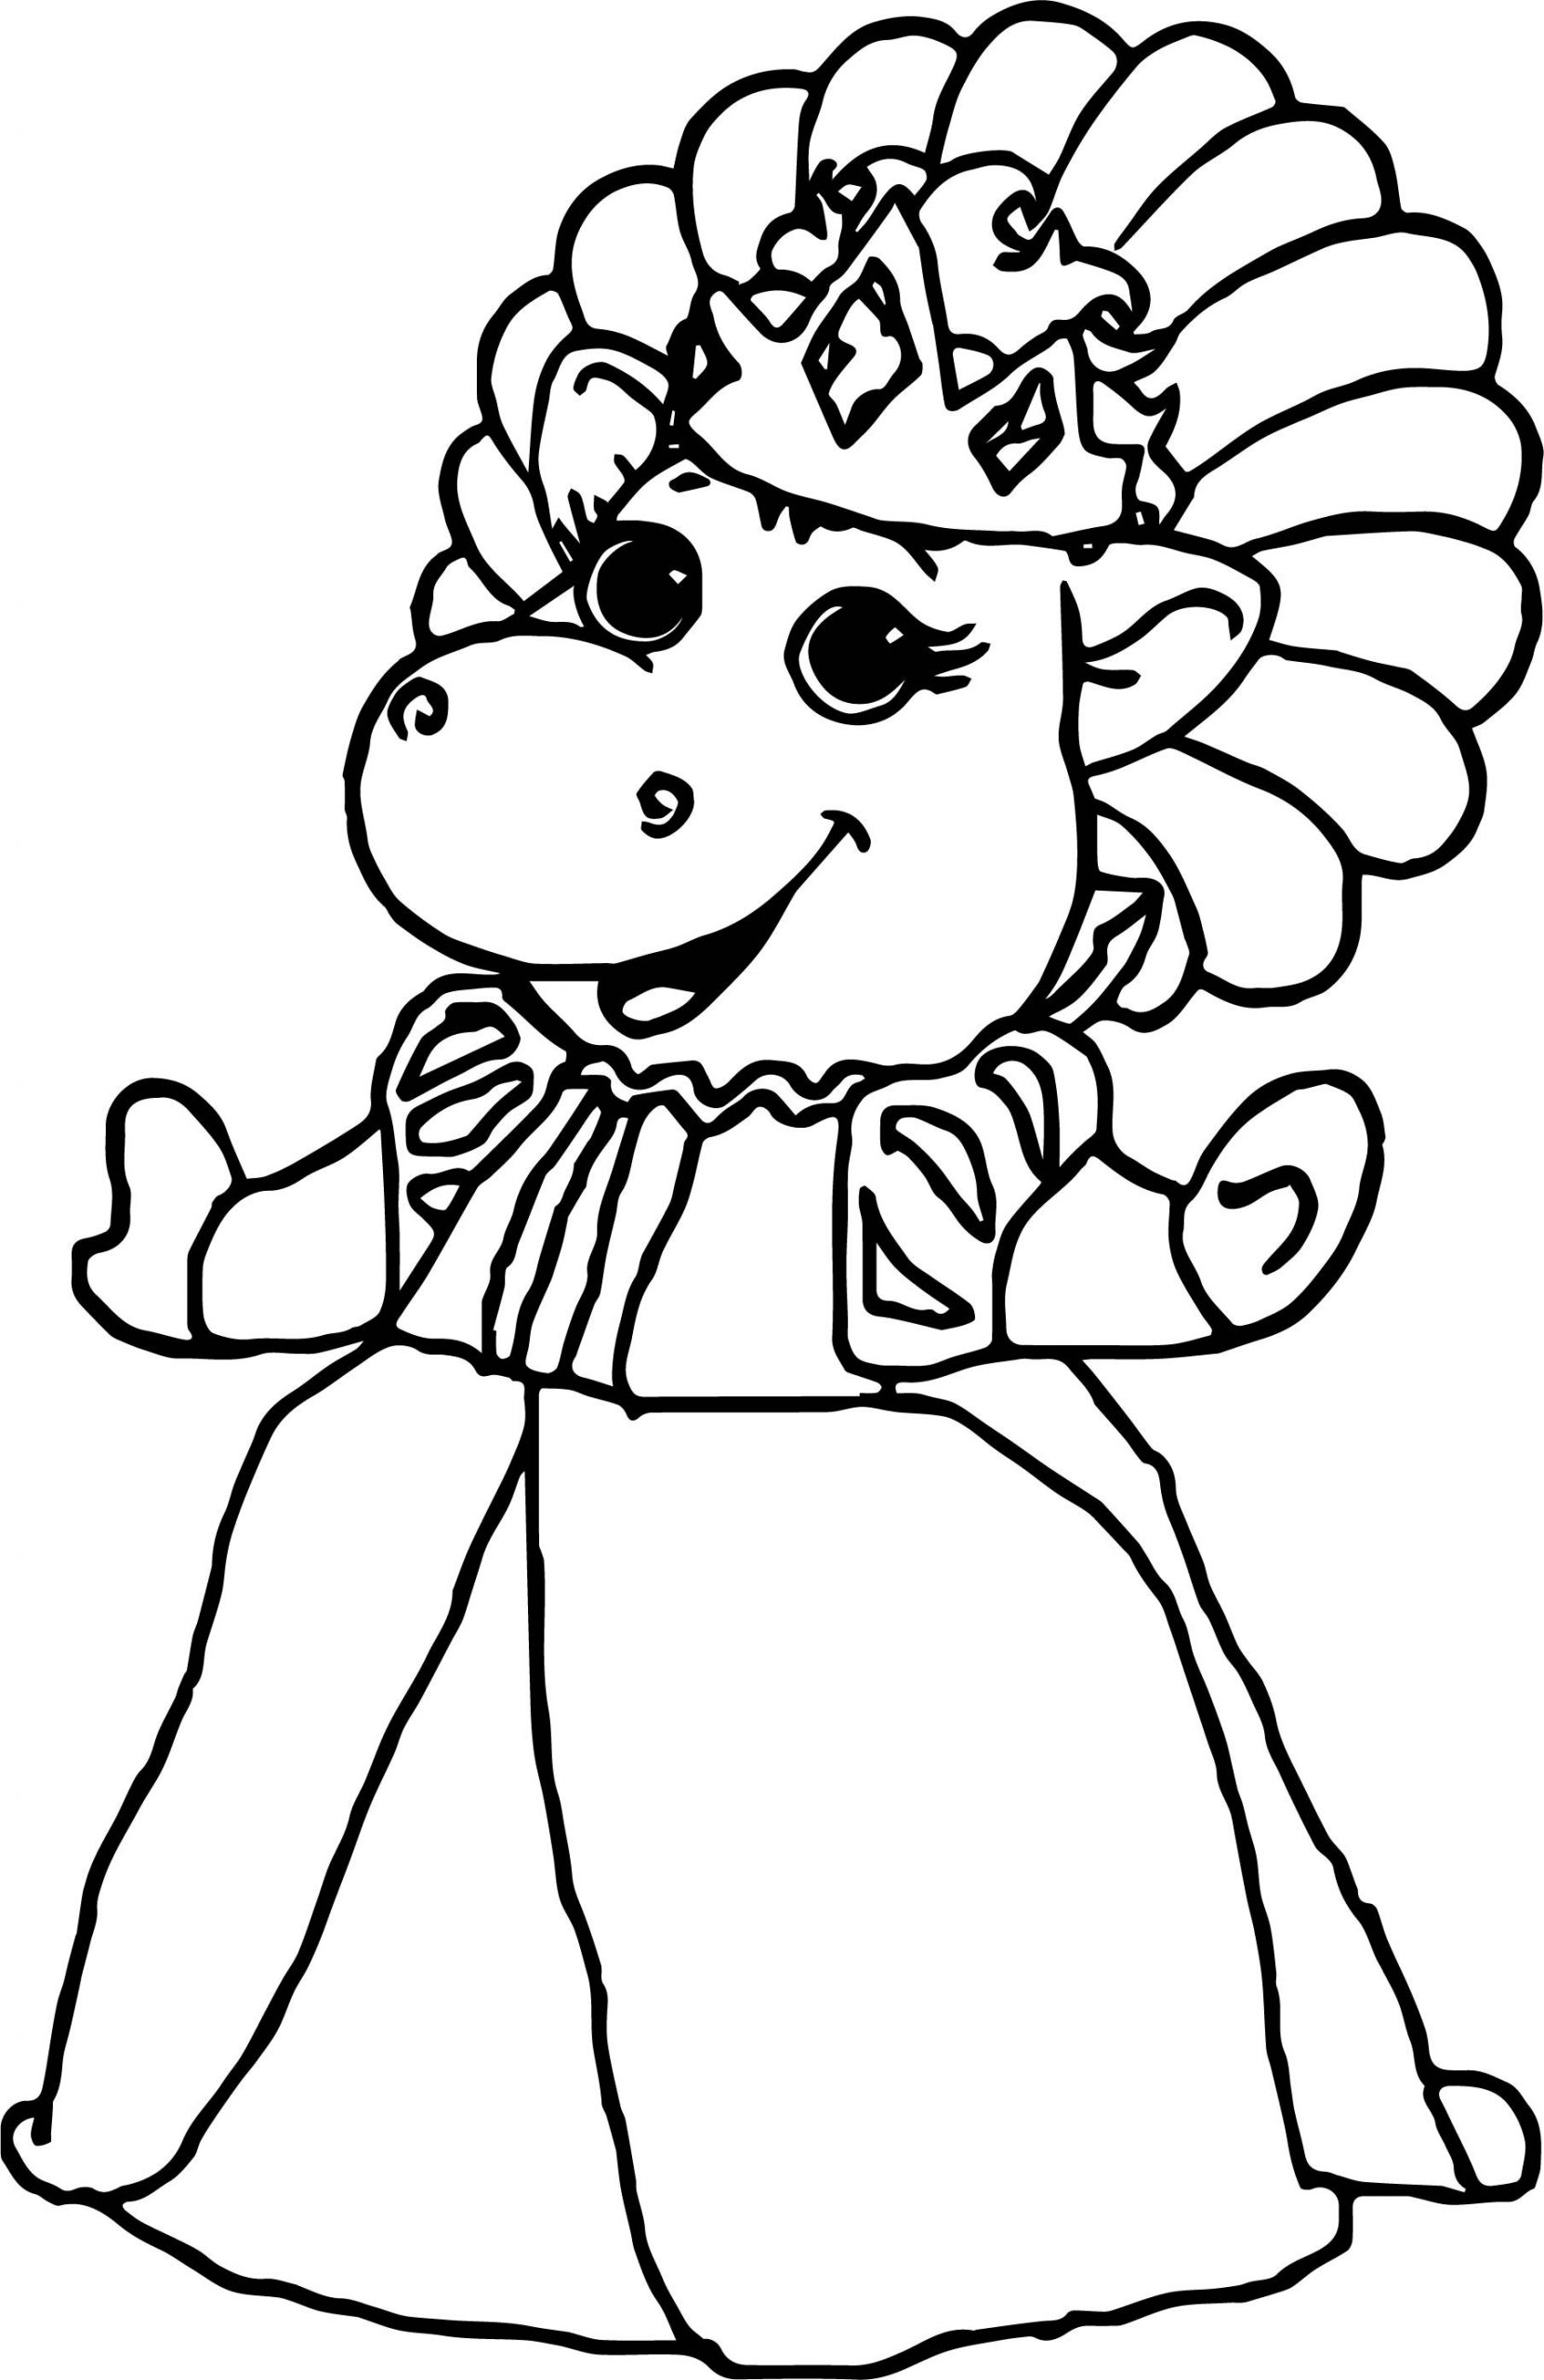 Baby Bop Coloring Pages
 Baby Bop Princess Coloring Page